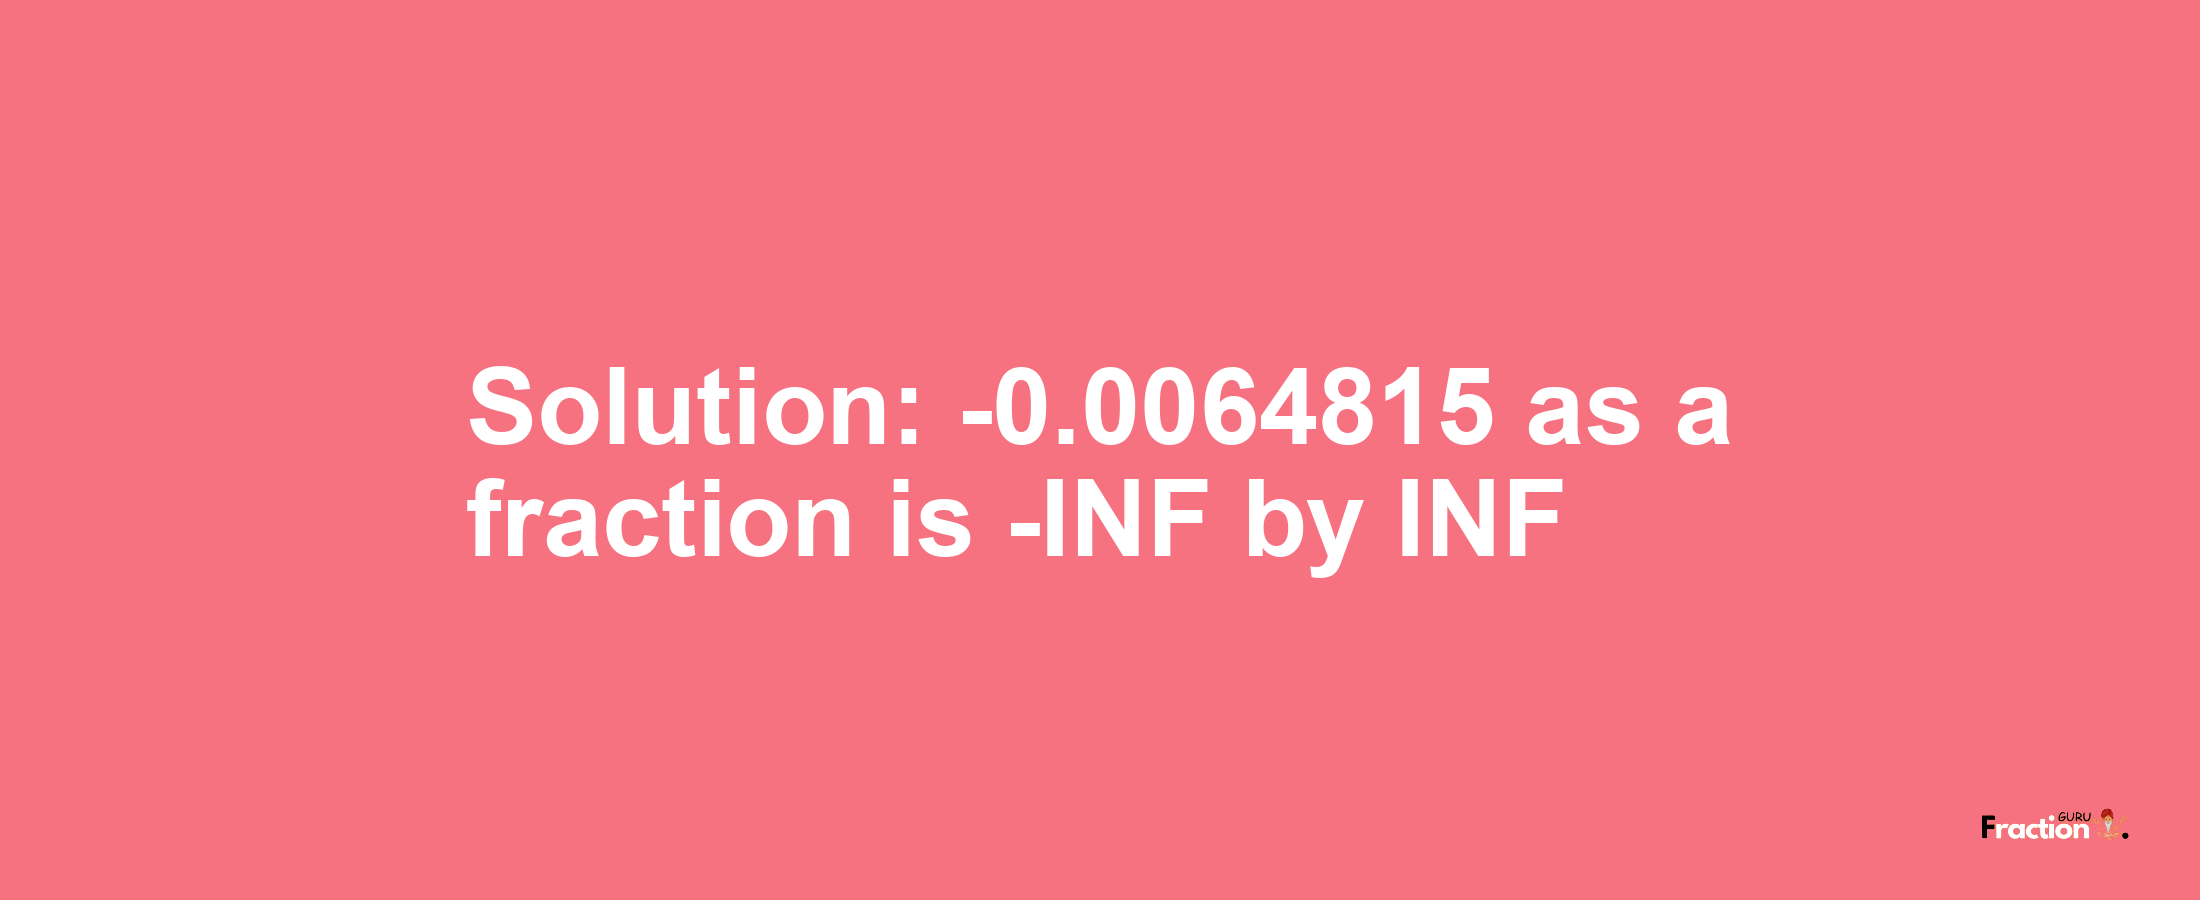 Solution:-0.0064815 as a fraction is -INF/INF